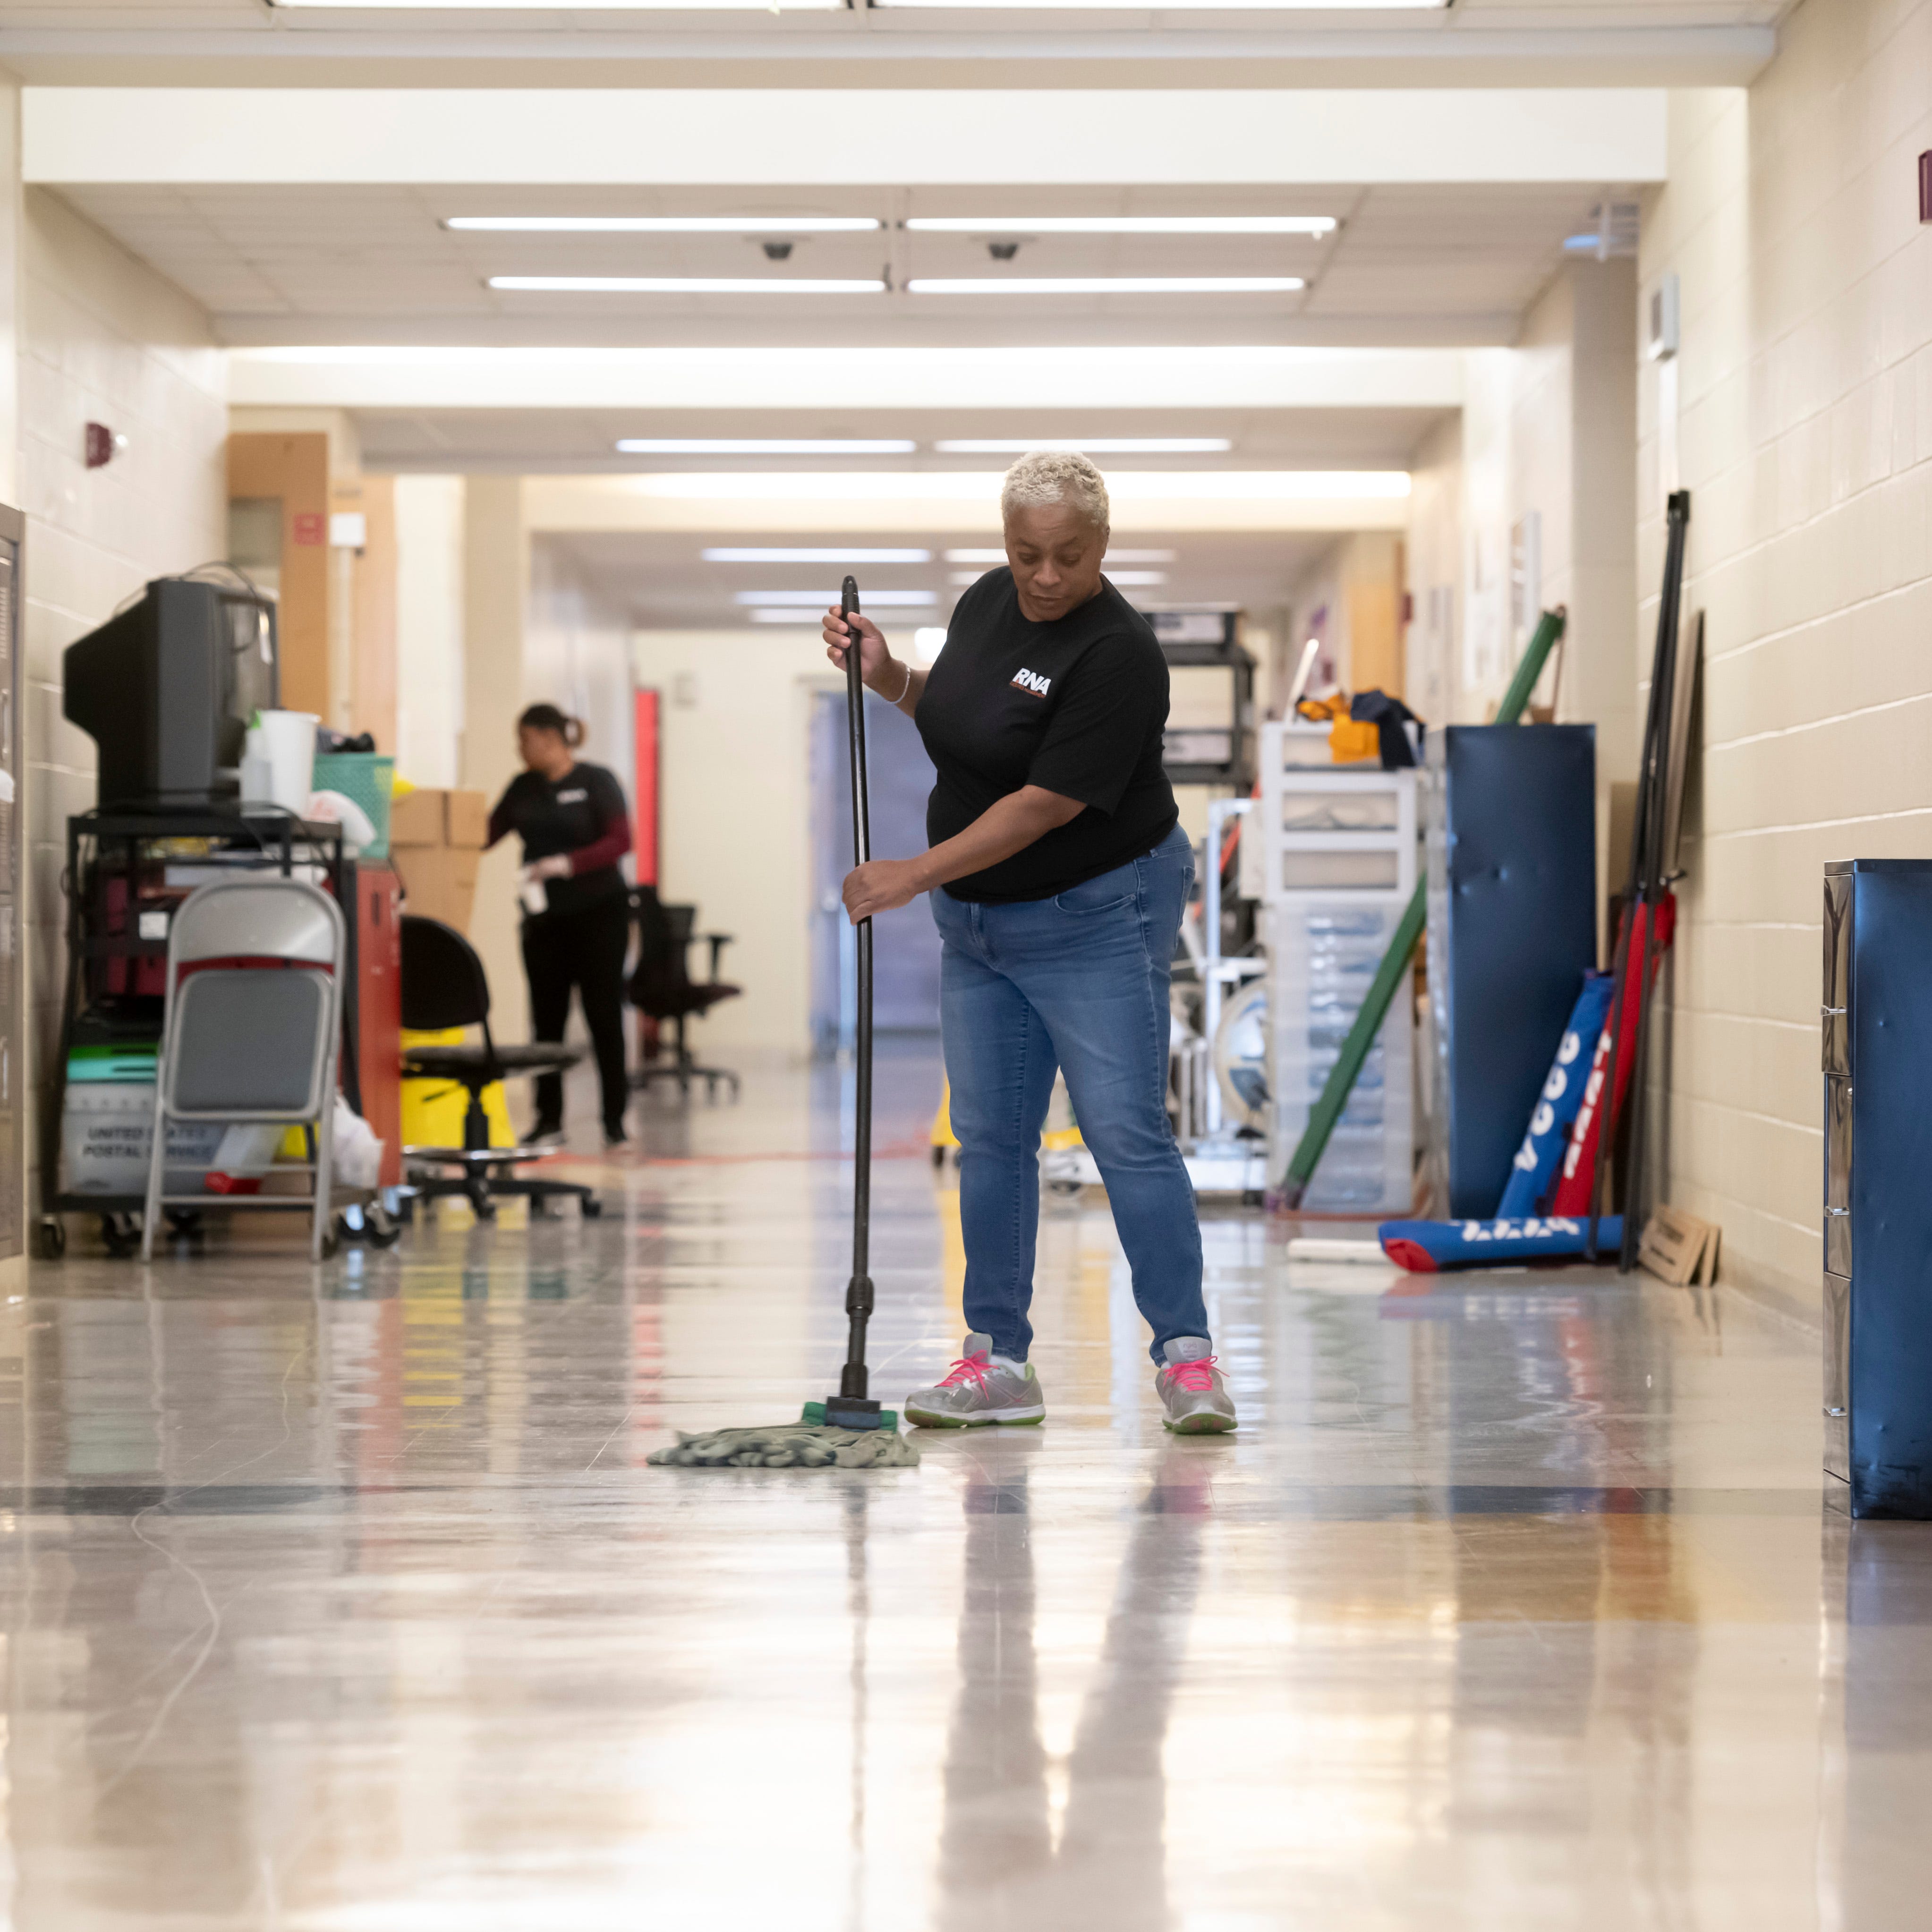 Lorna Bryant, a custodian with RNA Facilities Management, mops the floor inside Renaissance high school, which was being cleaned due to the corona virus, April 2, 2020. Every classroom was emptied of furniture for the cleaning.